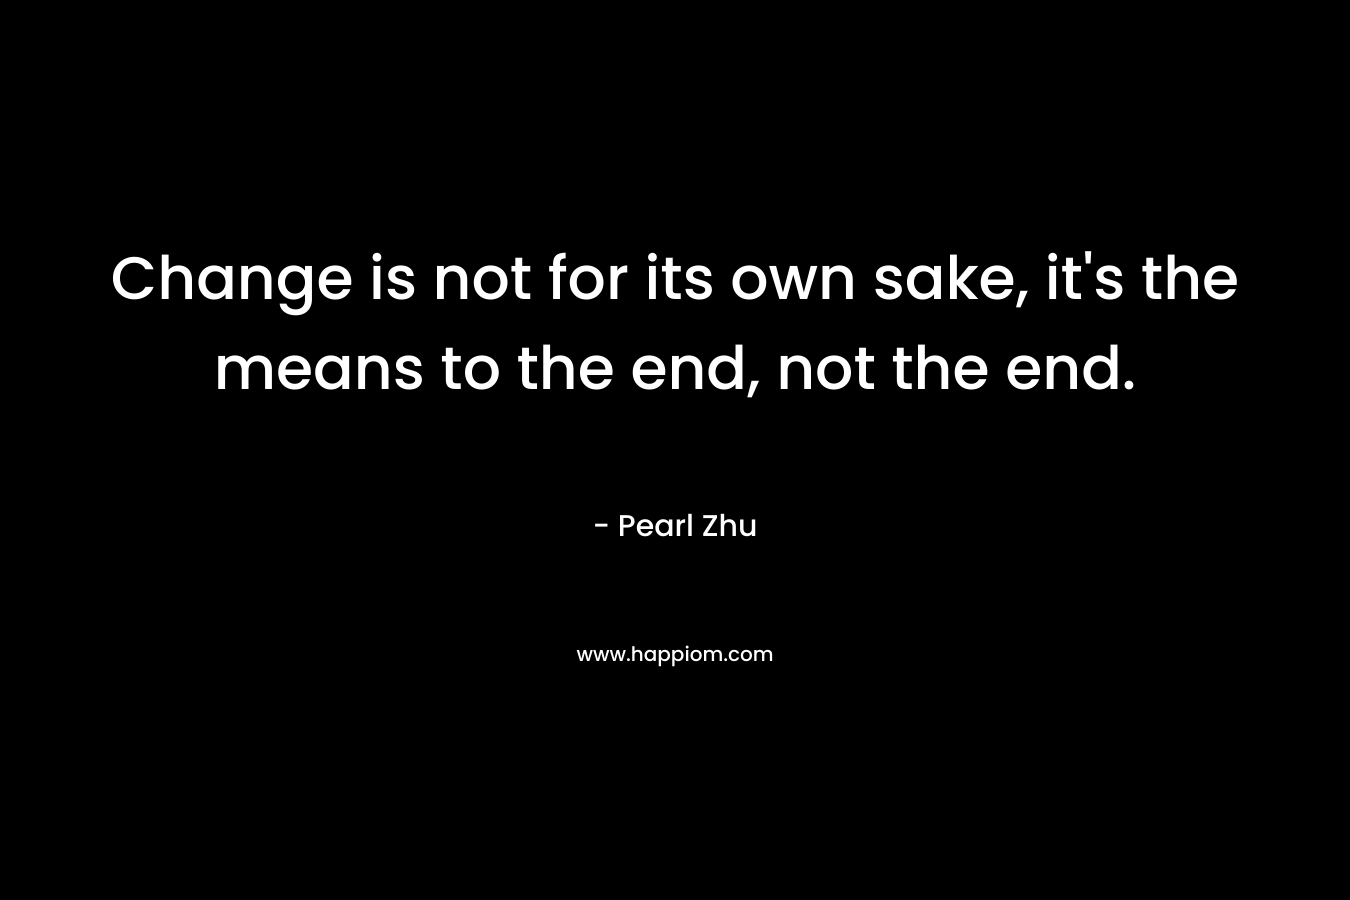 Change is not for its own sake, it's the means to the end, not the end.